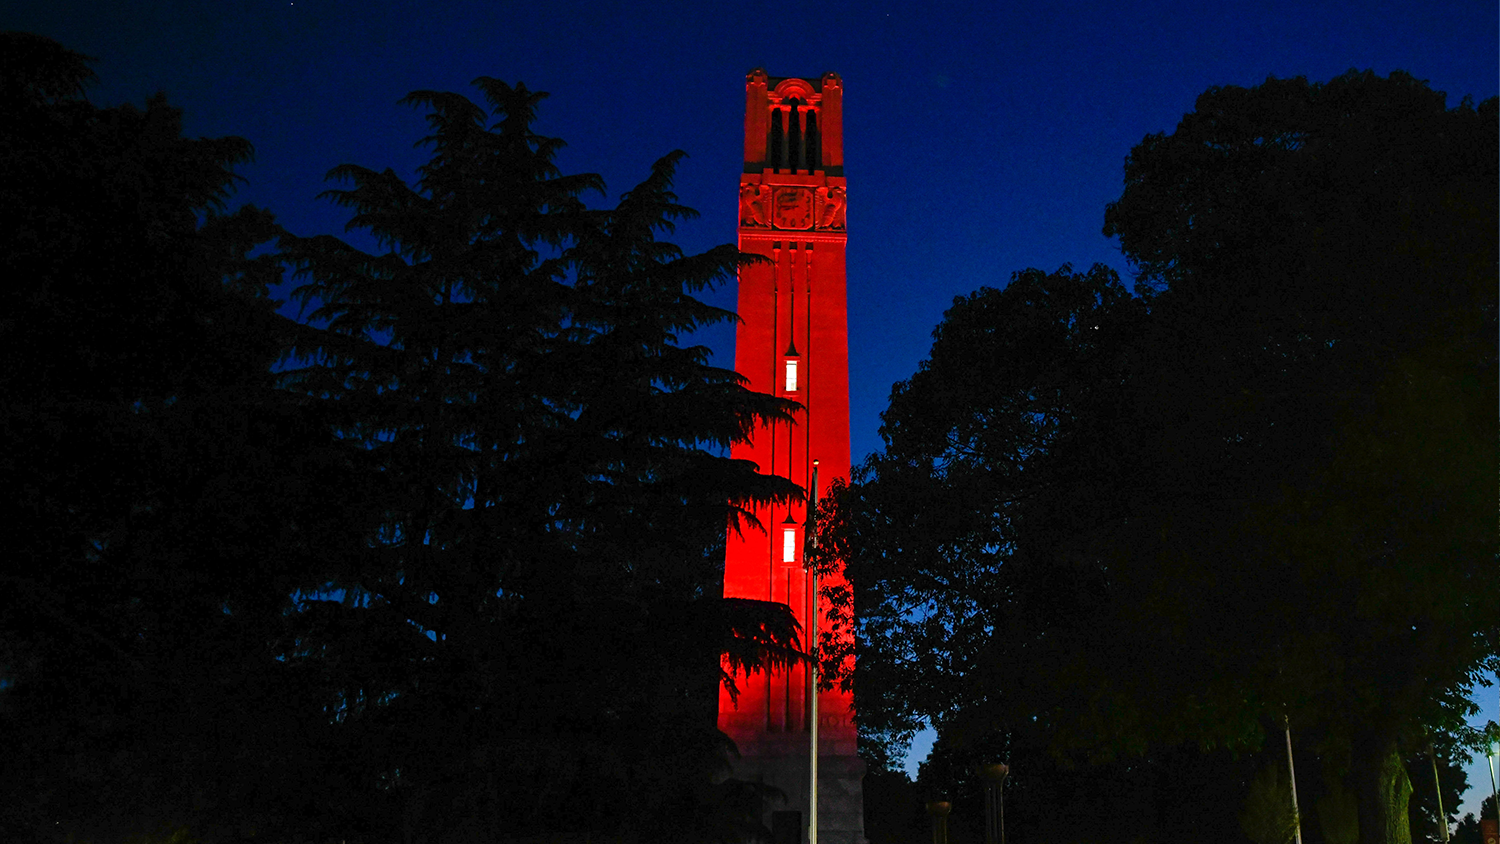 The belltower is light in red at night.